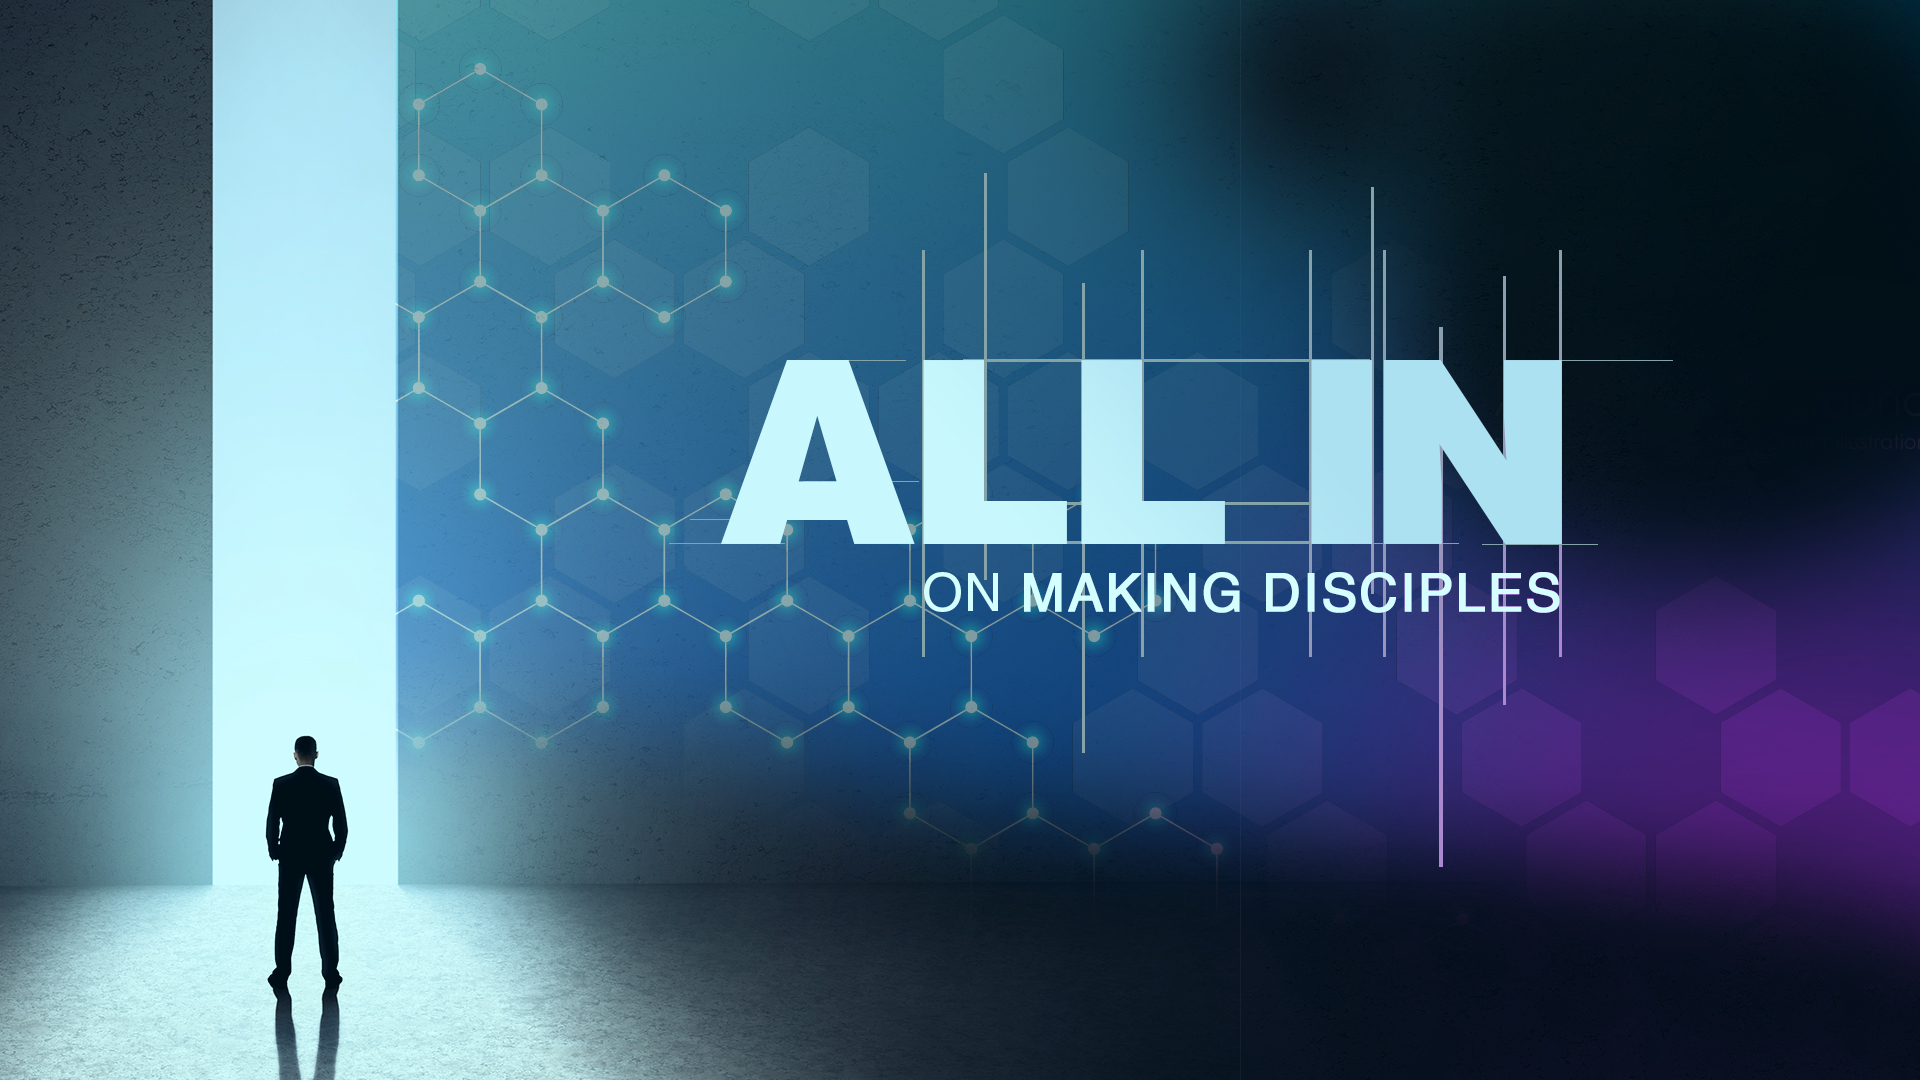 All In on Making Disciples